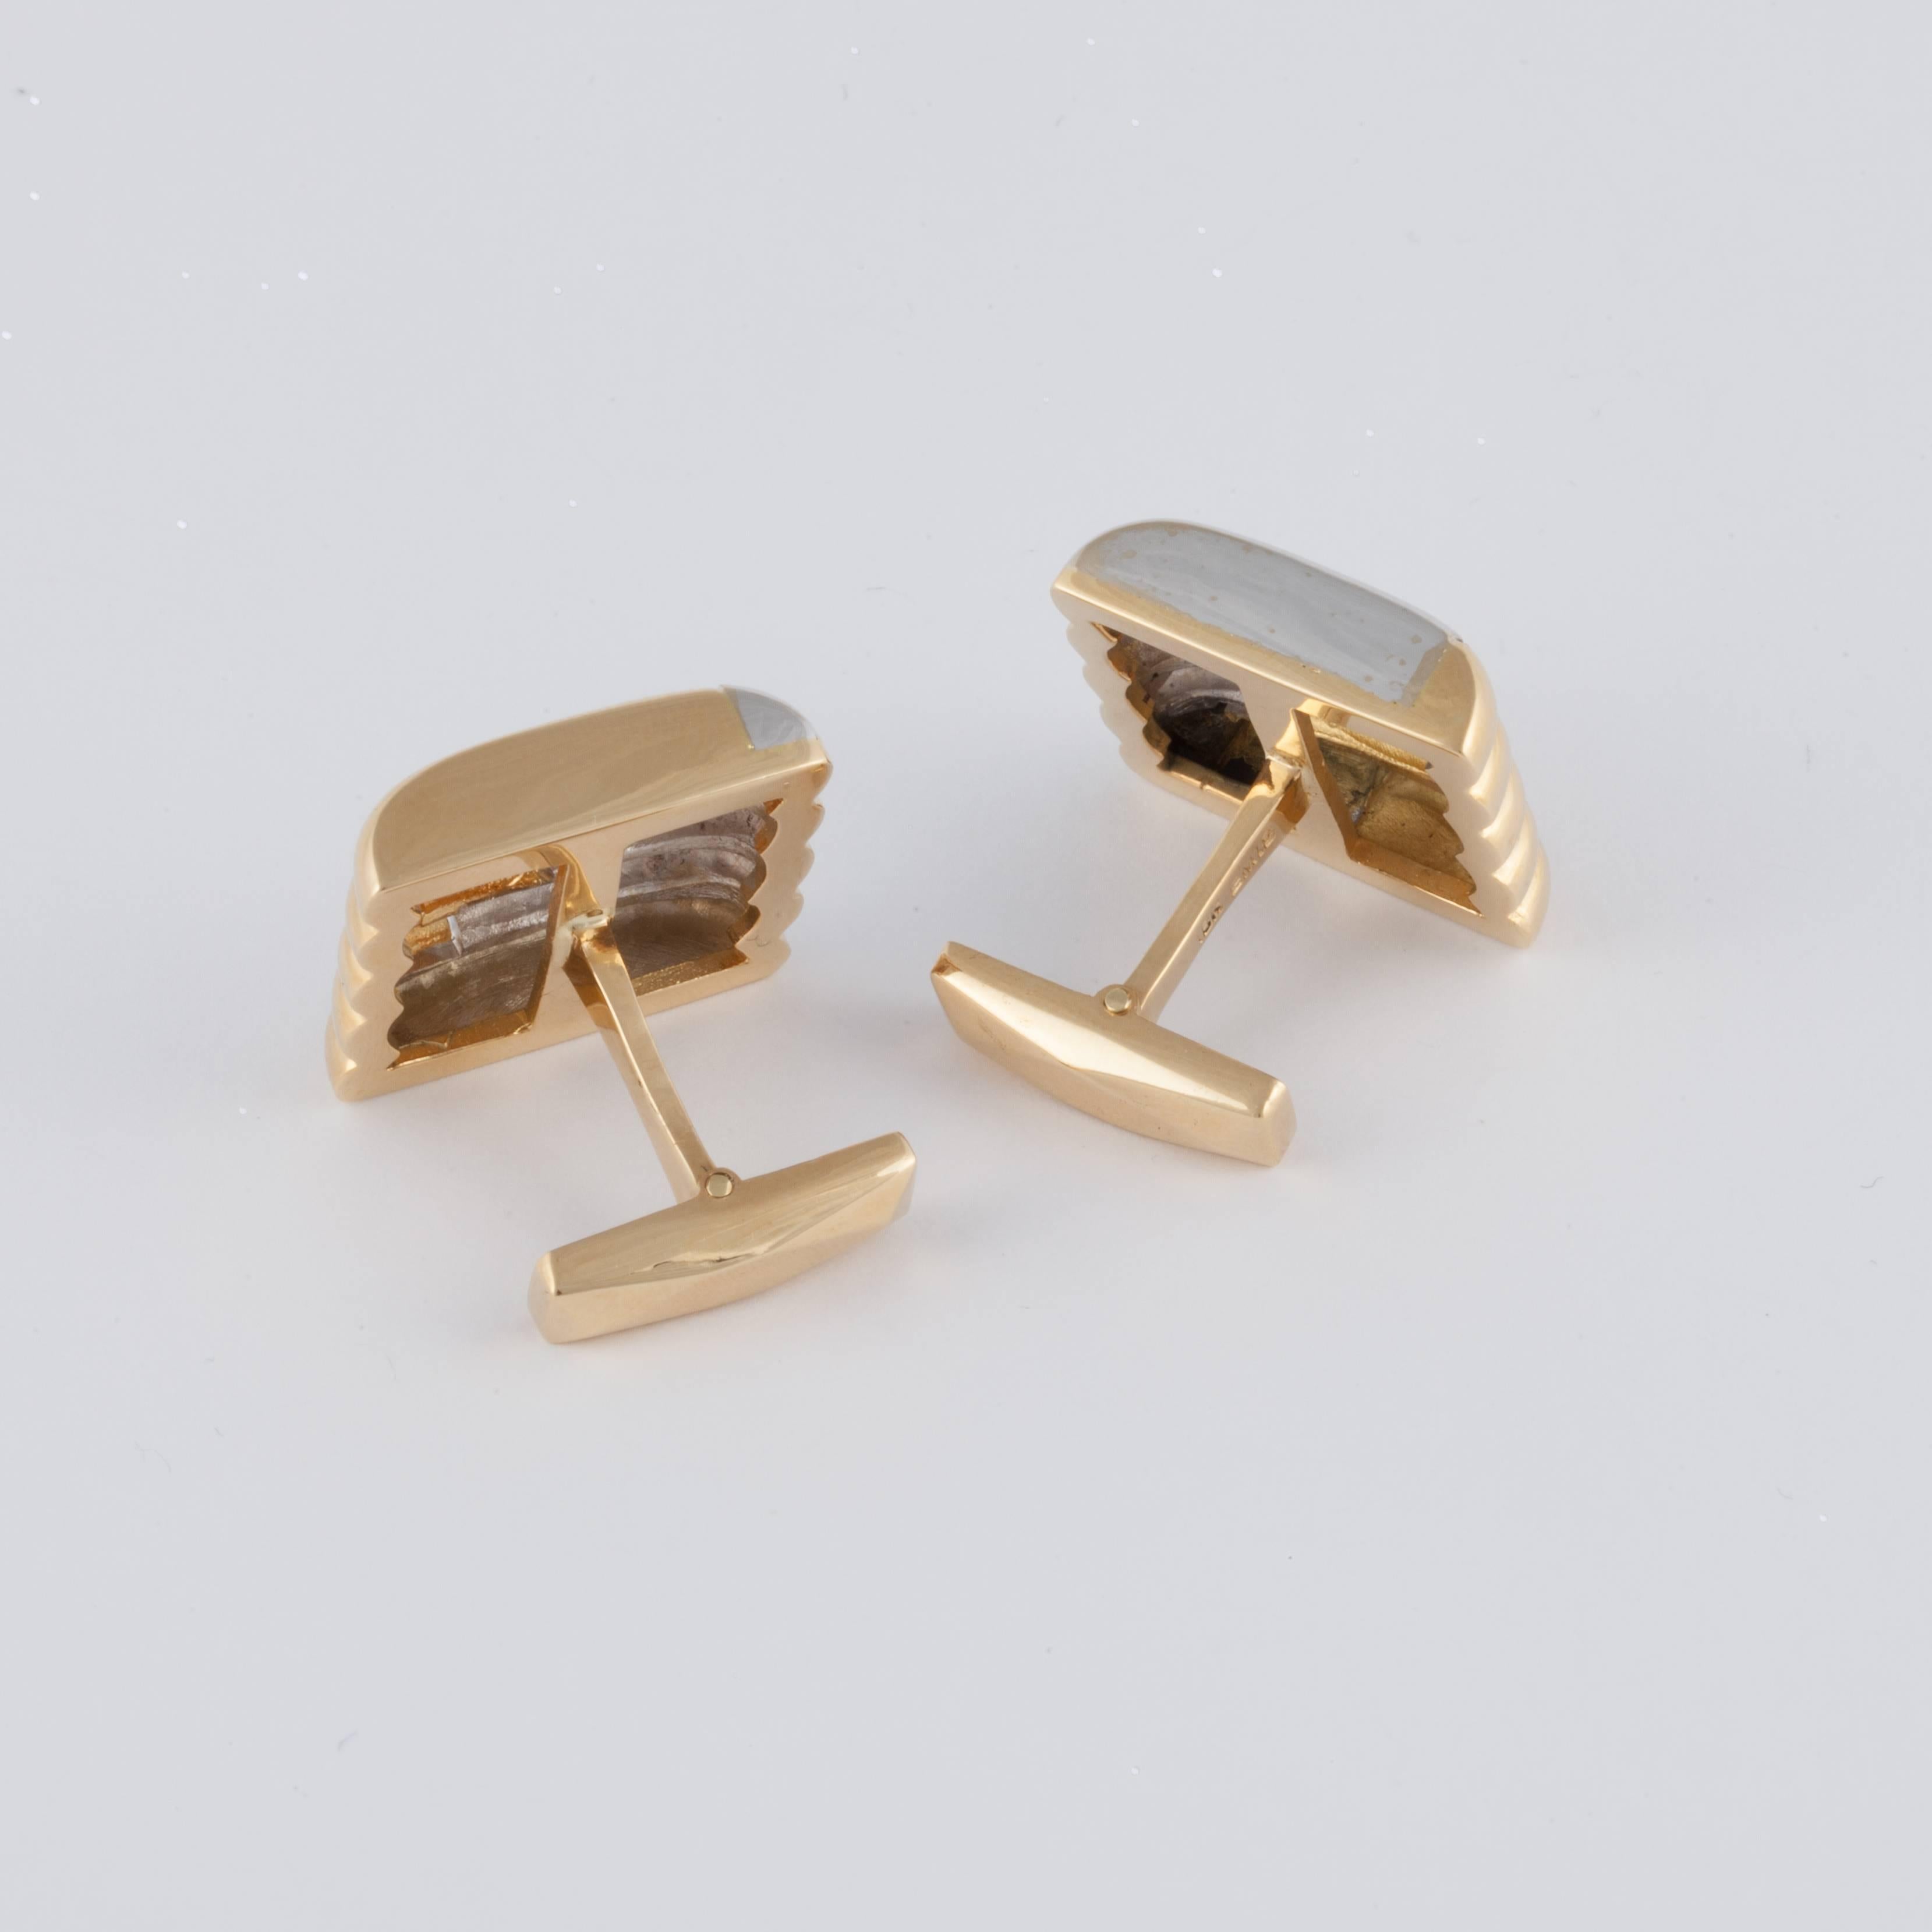 Estate Emis 18K Two-Toned Gold Cufflinks In Excellent Condition For Sale In Houston, TX